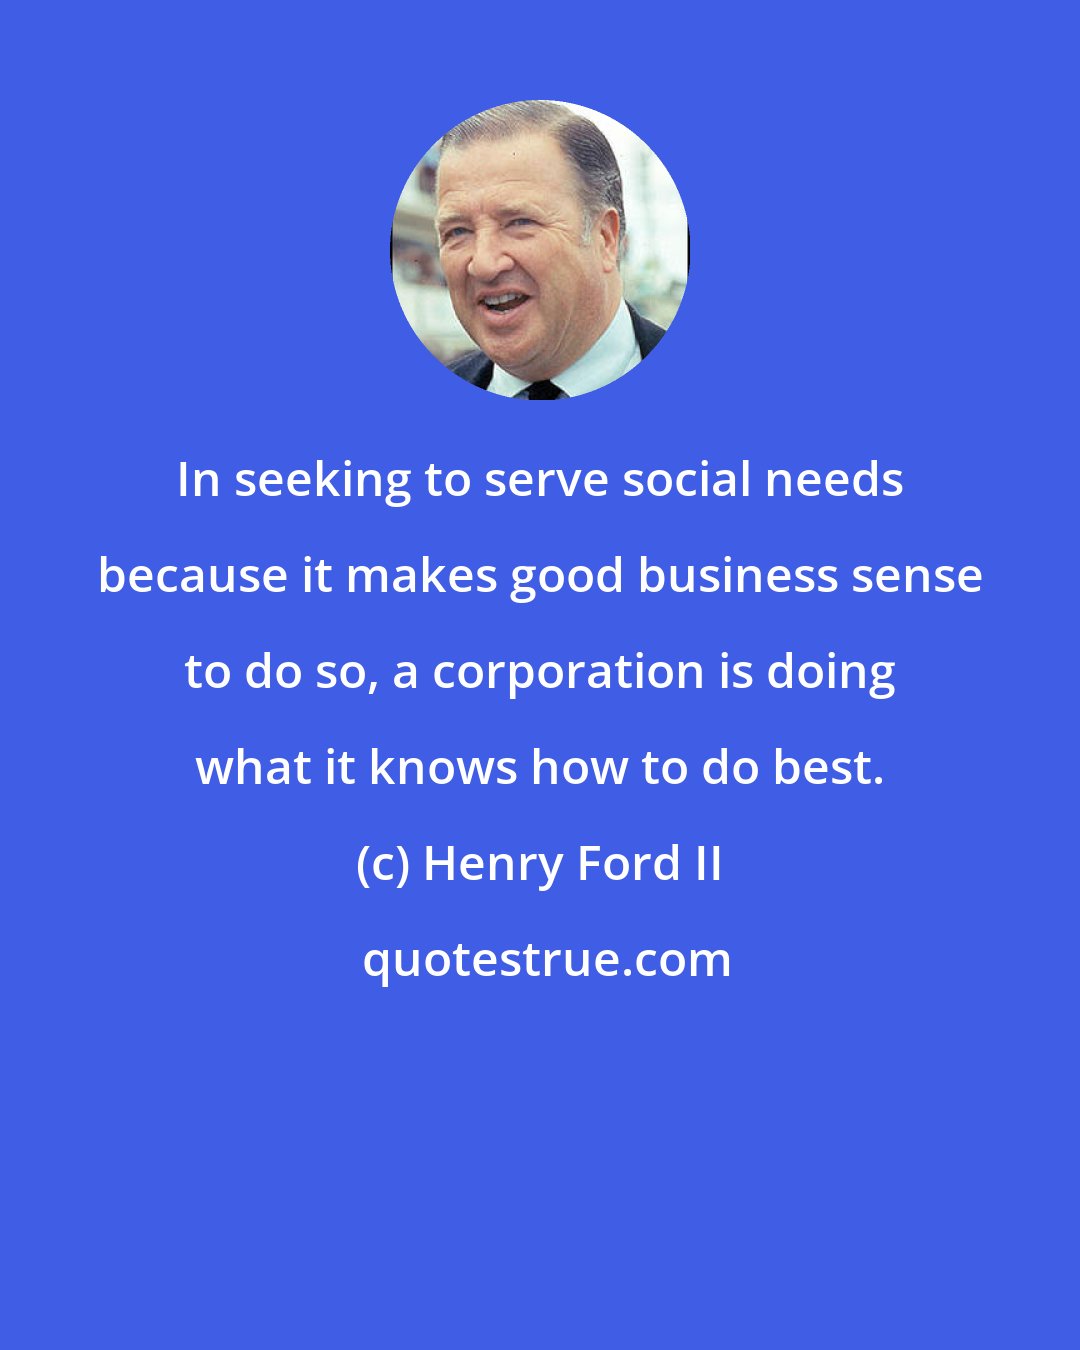 Henry Ford II: In seeking to serve social needs because it makes good business sense to do so, a corporation is doing what it knows how to do best.